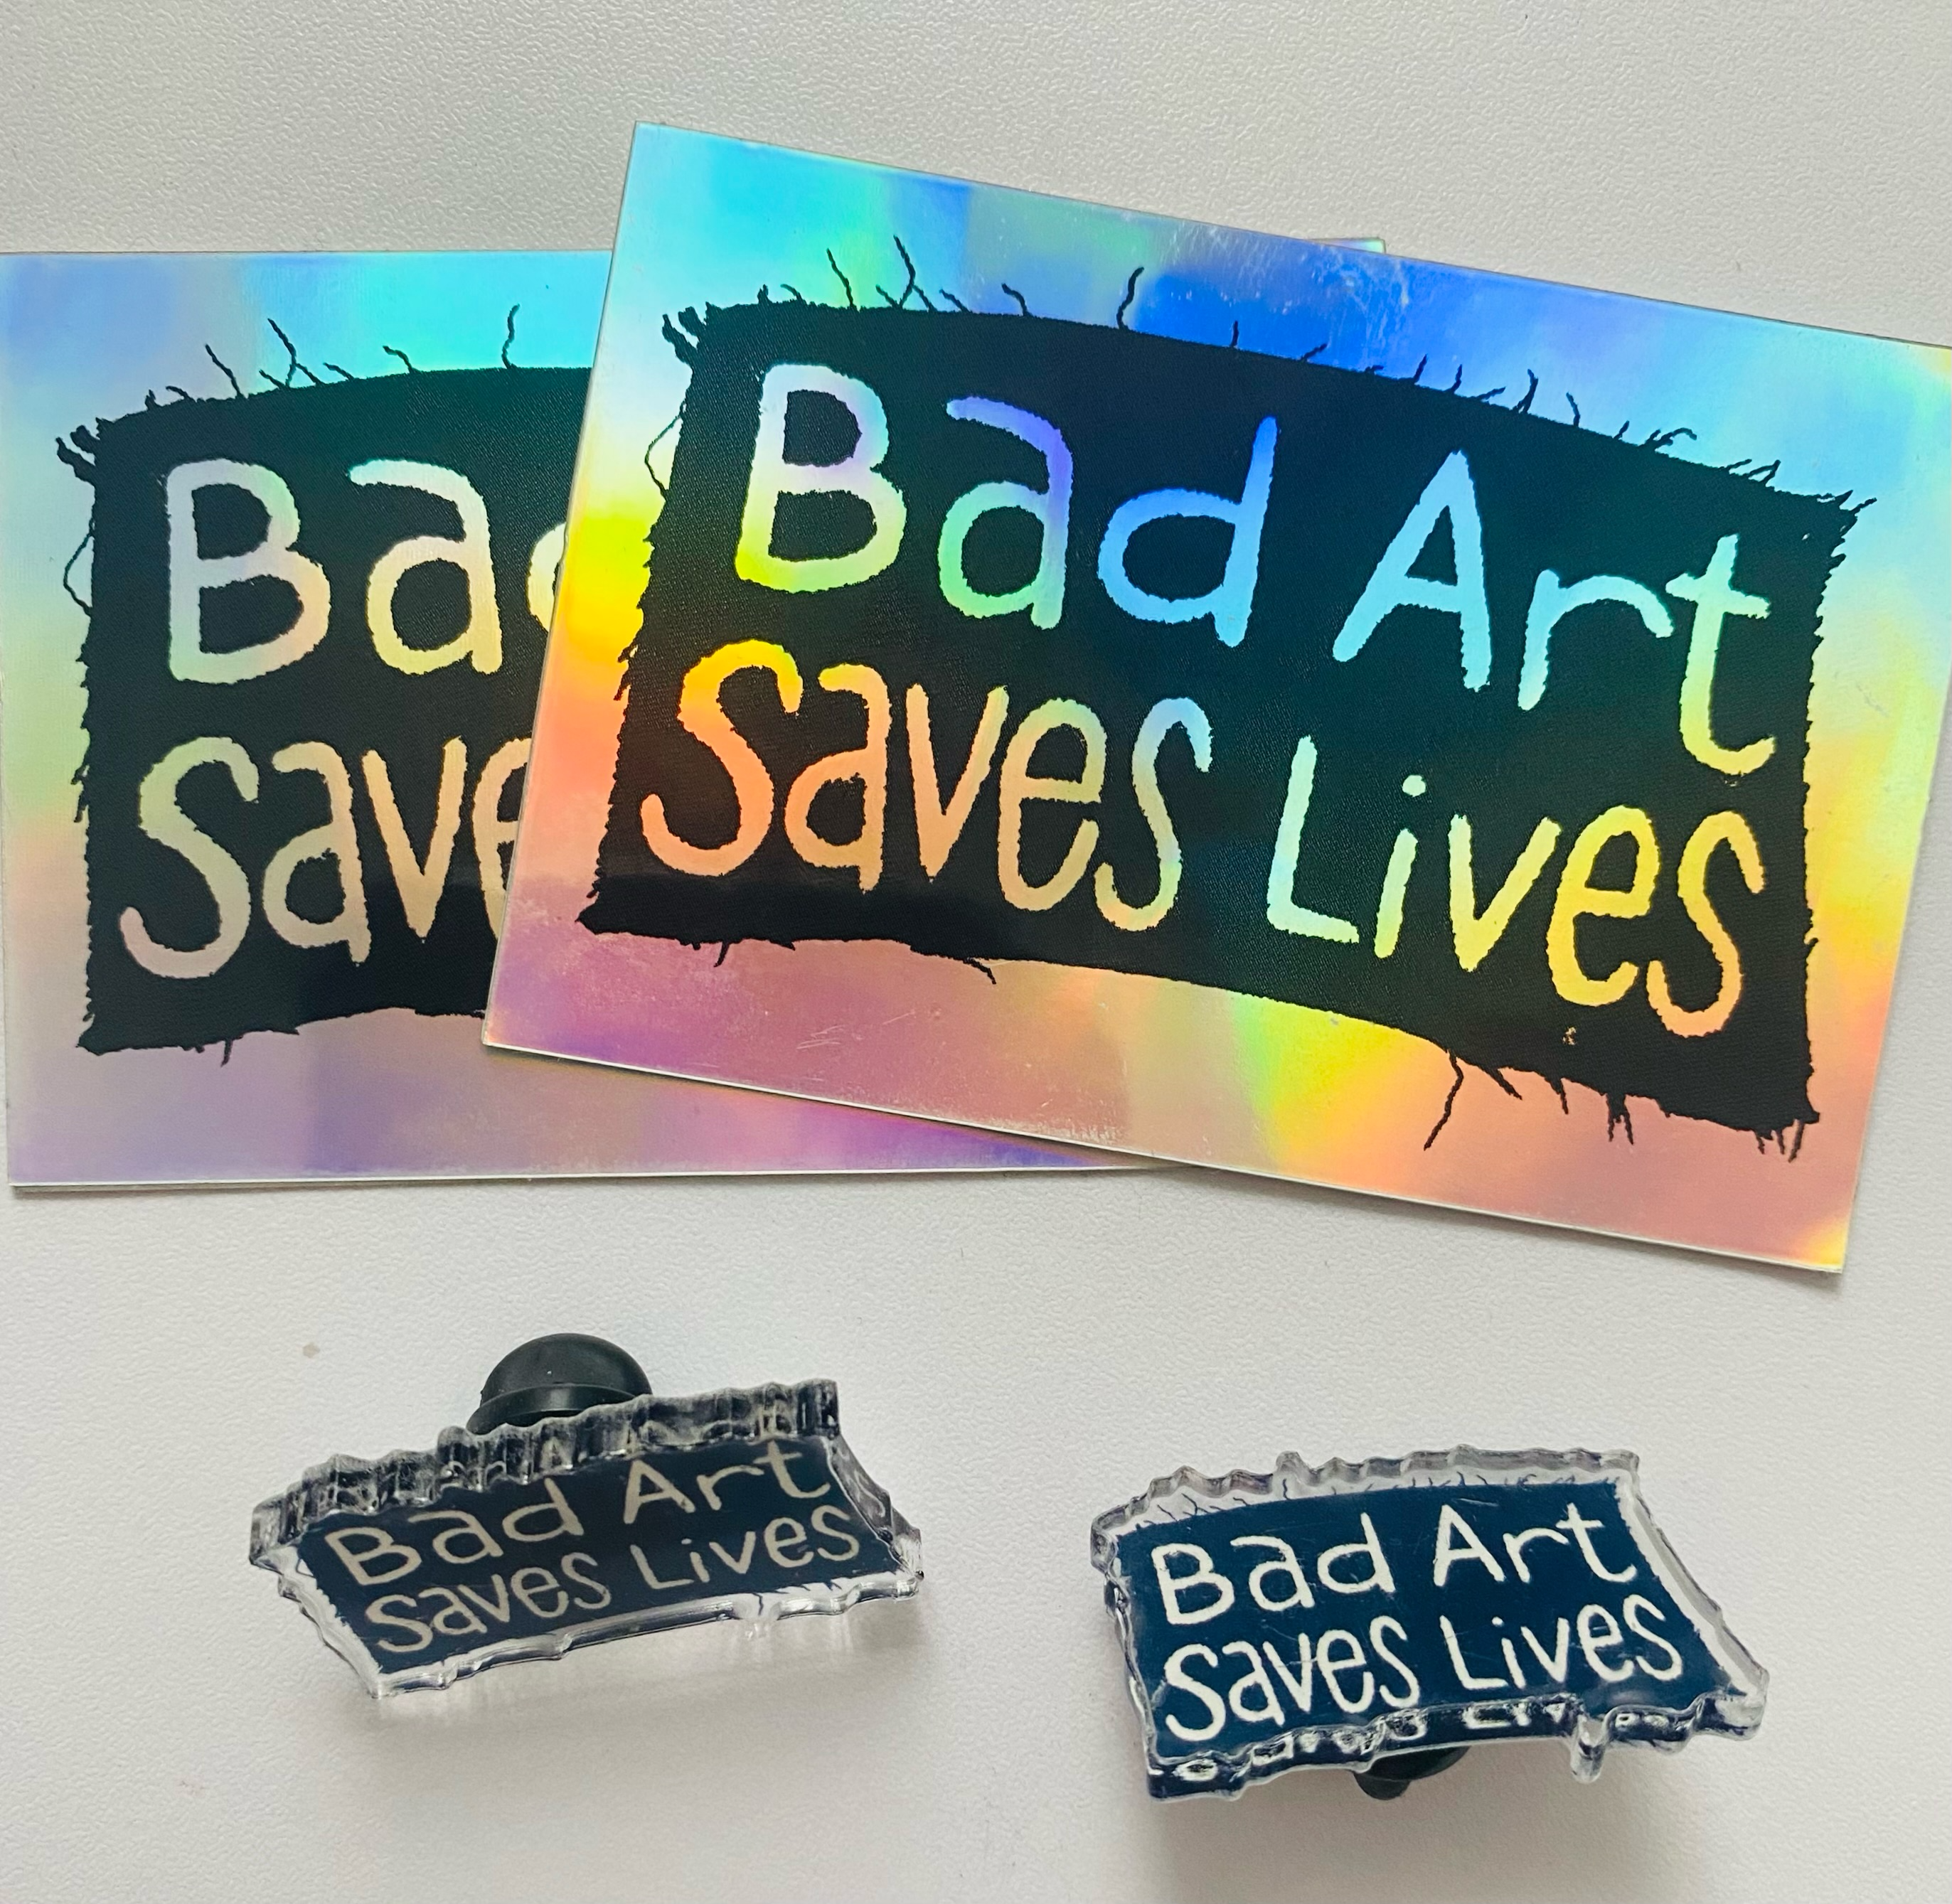 A black patch with "Bad Art Saves Lives" written in white acrylic paint centered in the middle. A holographic sticker with "Bad Art Saves Lives" written in the center, surrounded by a black box. Clear pins with the same design.